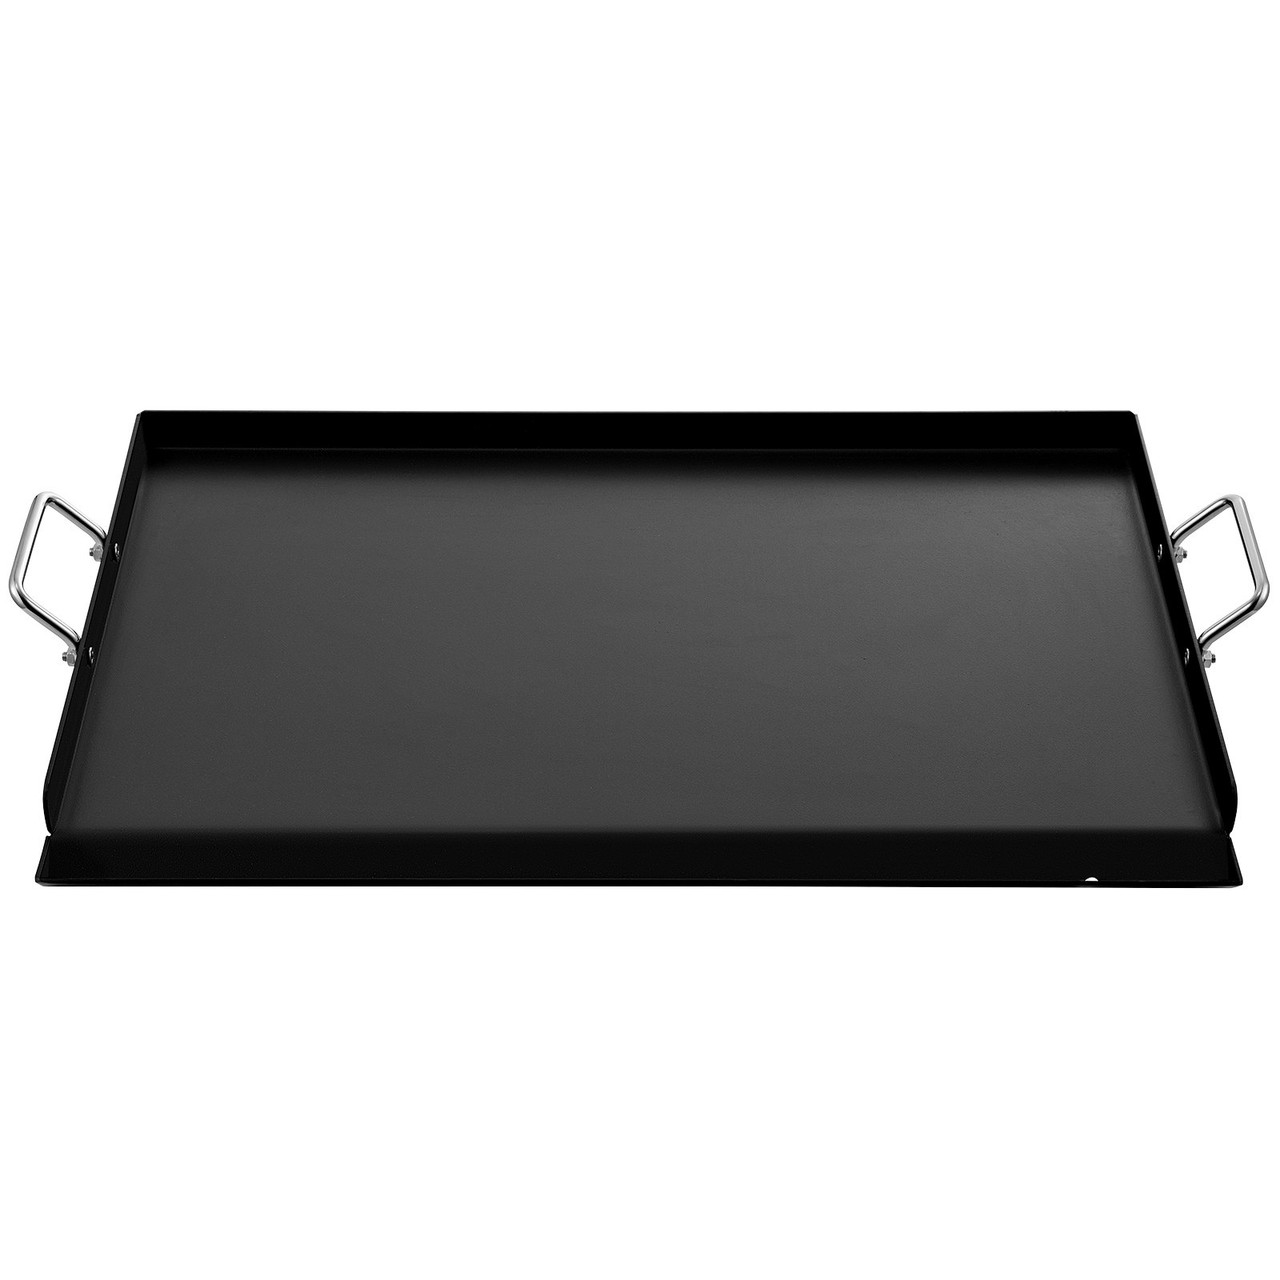 Carbon Steel Griddle, 14" x 32" Griddle Flat Top Plate, Griddle for BBQ Charcoal/Gas Gril with 2 Handles, Rectangular Flat Top Grill with Extra Drain